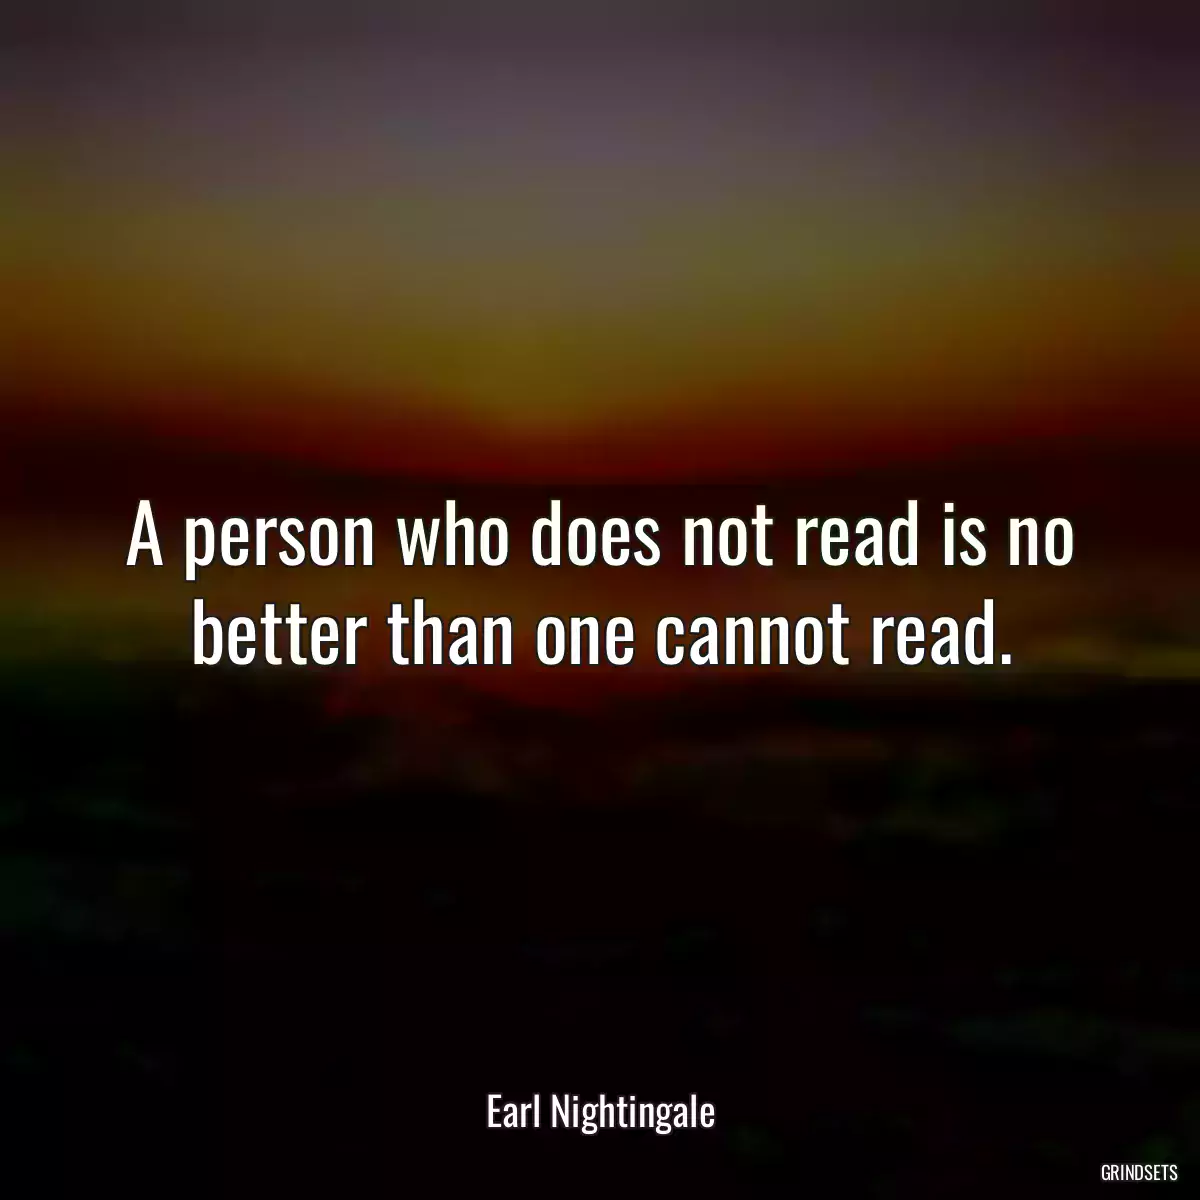 A person who does not read is no better than one cannot read.